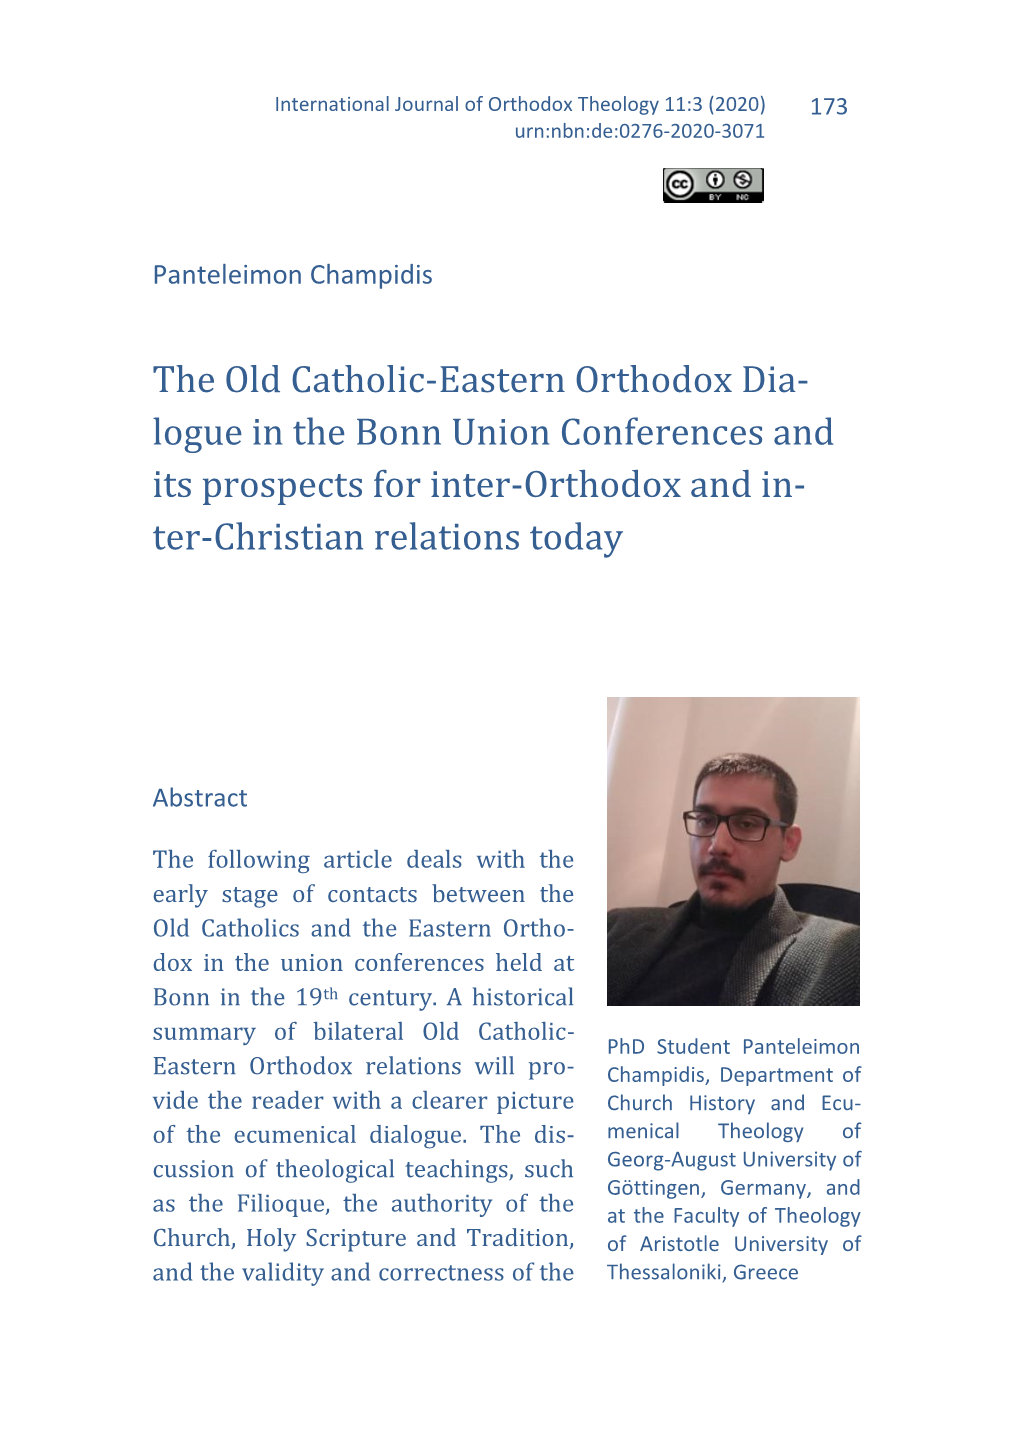 The Old Catholic-Eastern Orthodox Dia- Logue in the Bonn Union Conferences and Its Prospects for Inter-Orthodox and In- Ter-Christian Relations Today